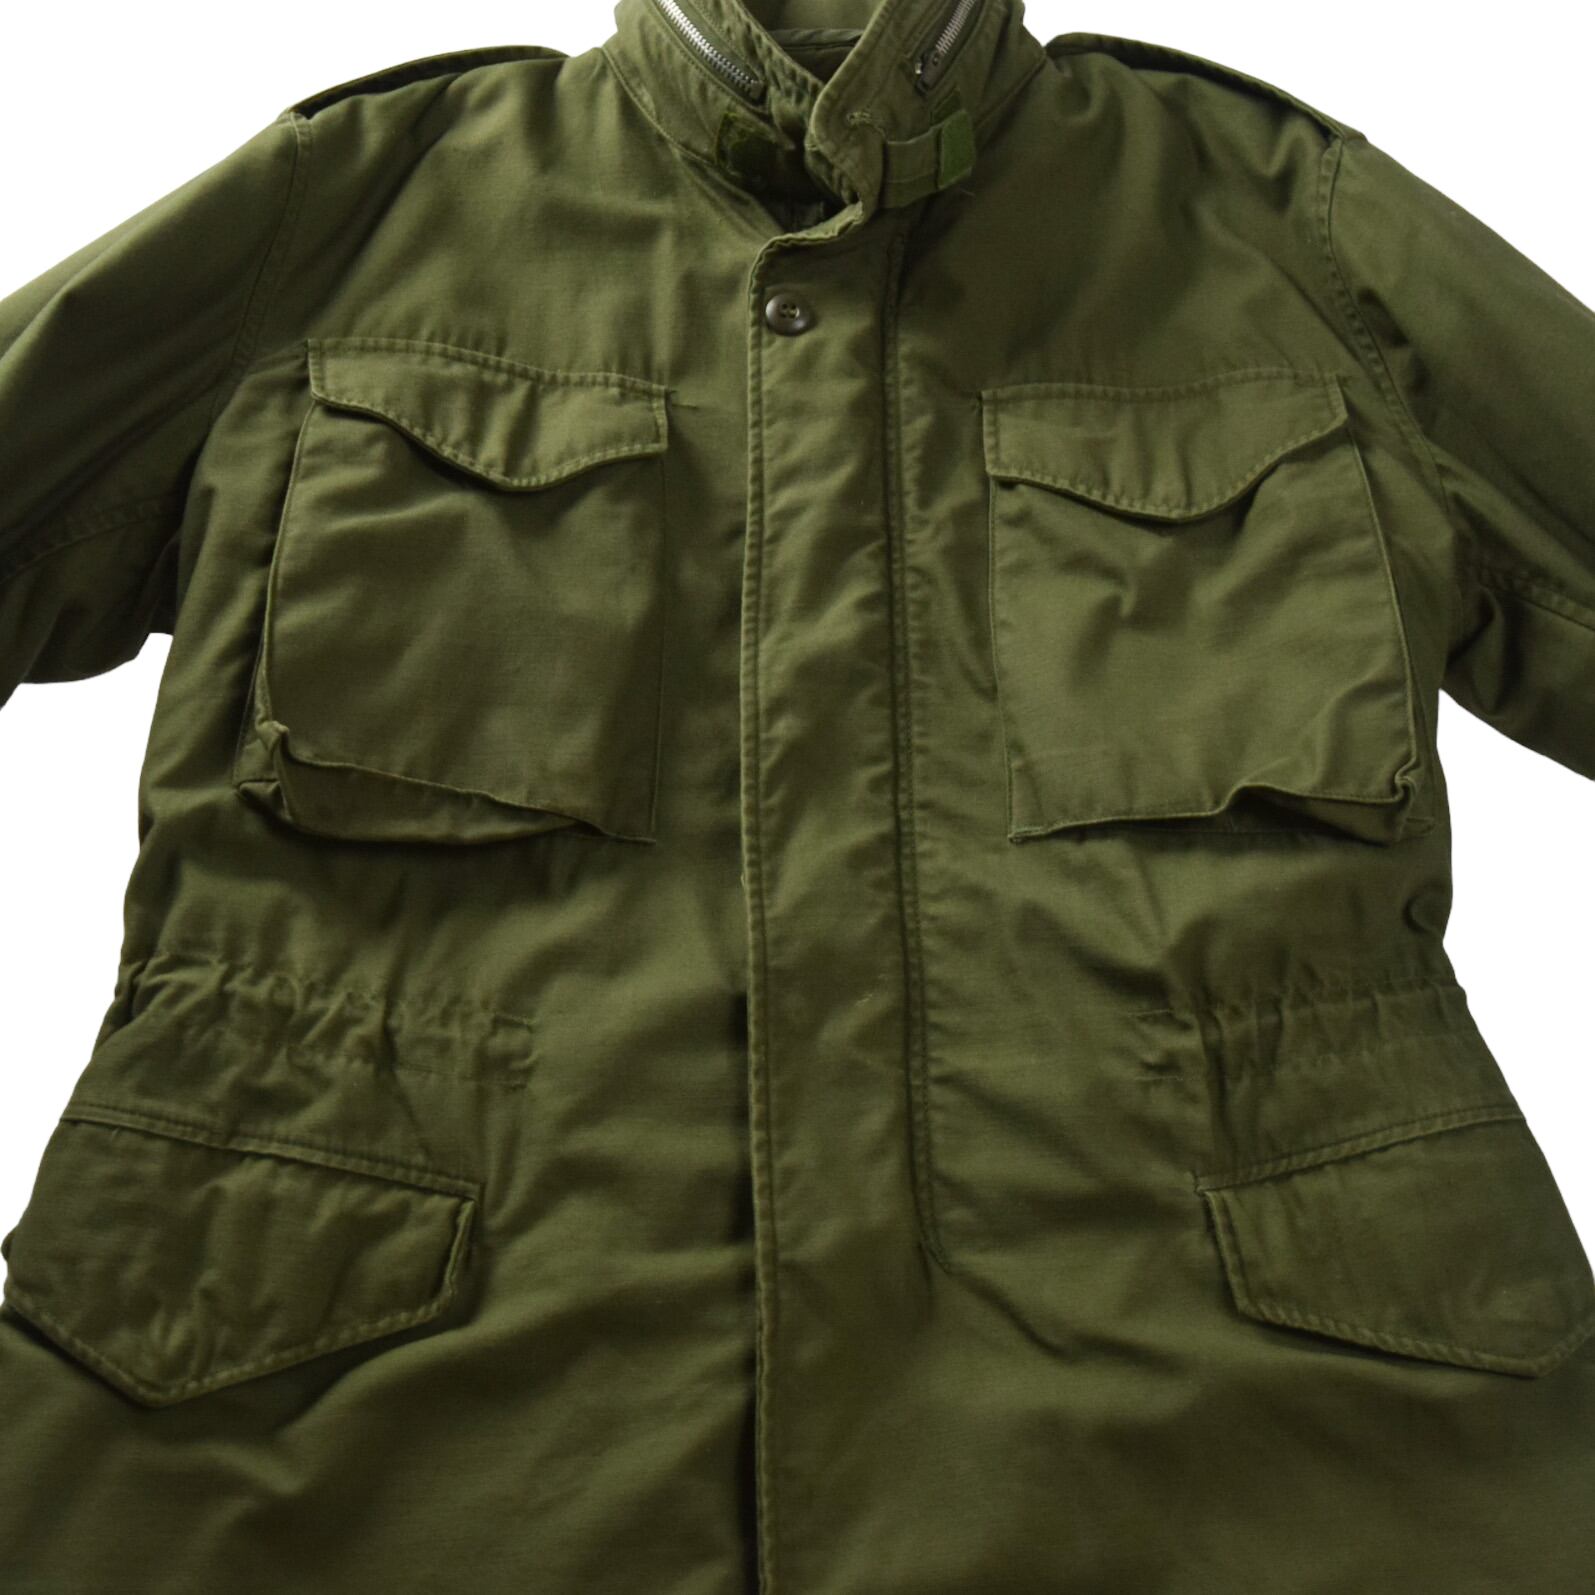 's 's "U.S.ARMY" Vintage M Field Jacket 2nd With